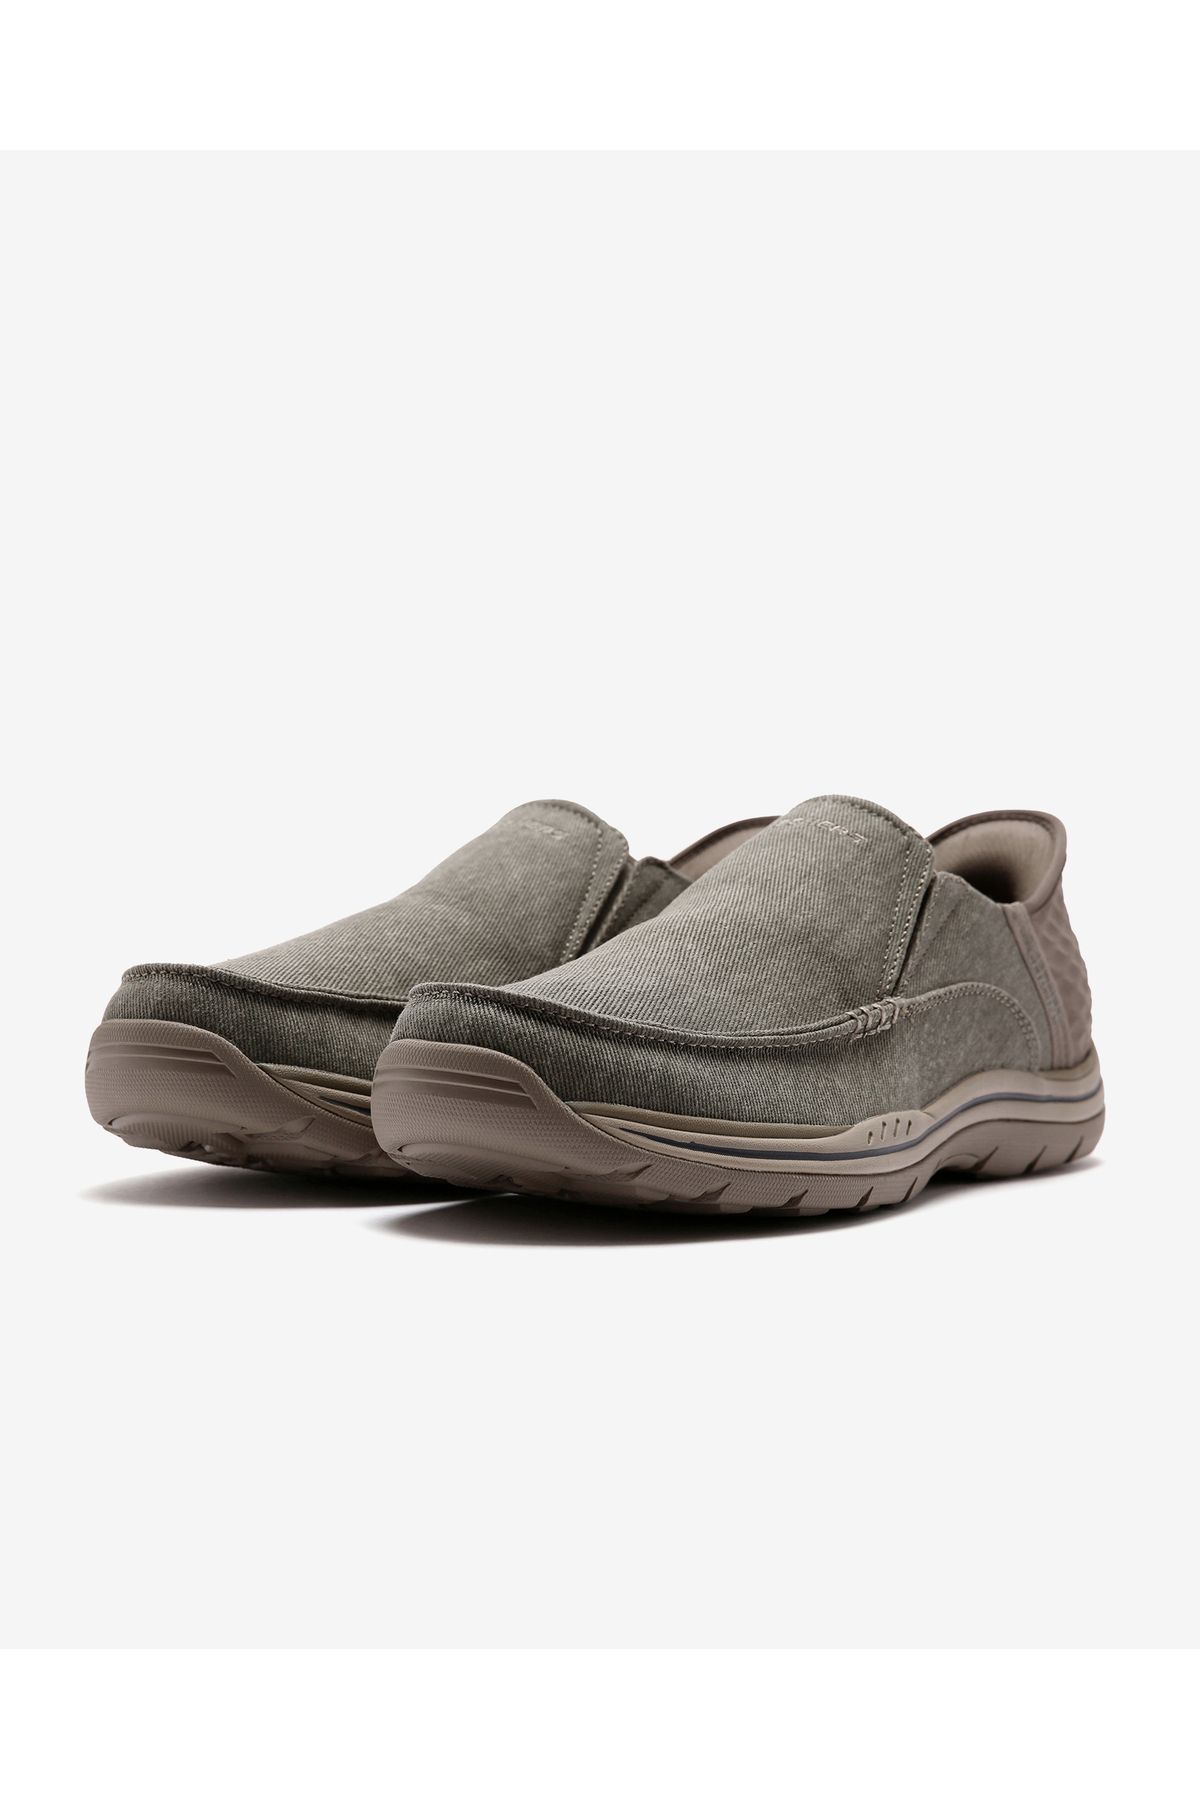 Skechers كفش كتانى اسپرت مردانه مدل expected cayson